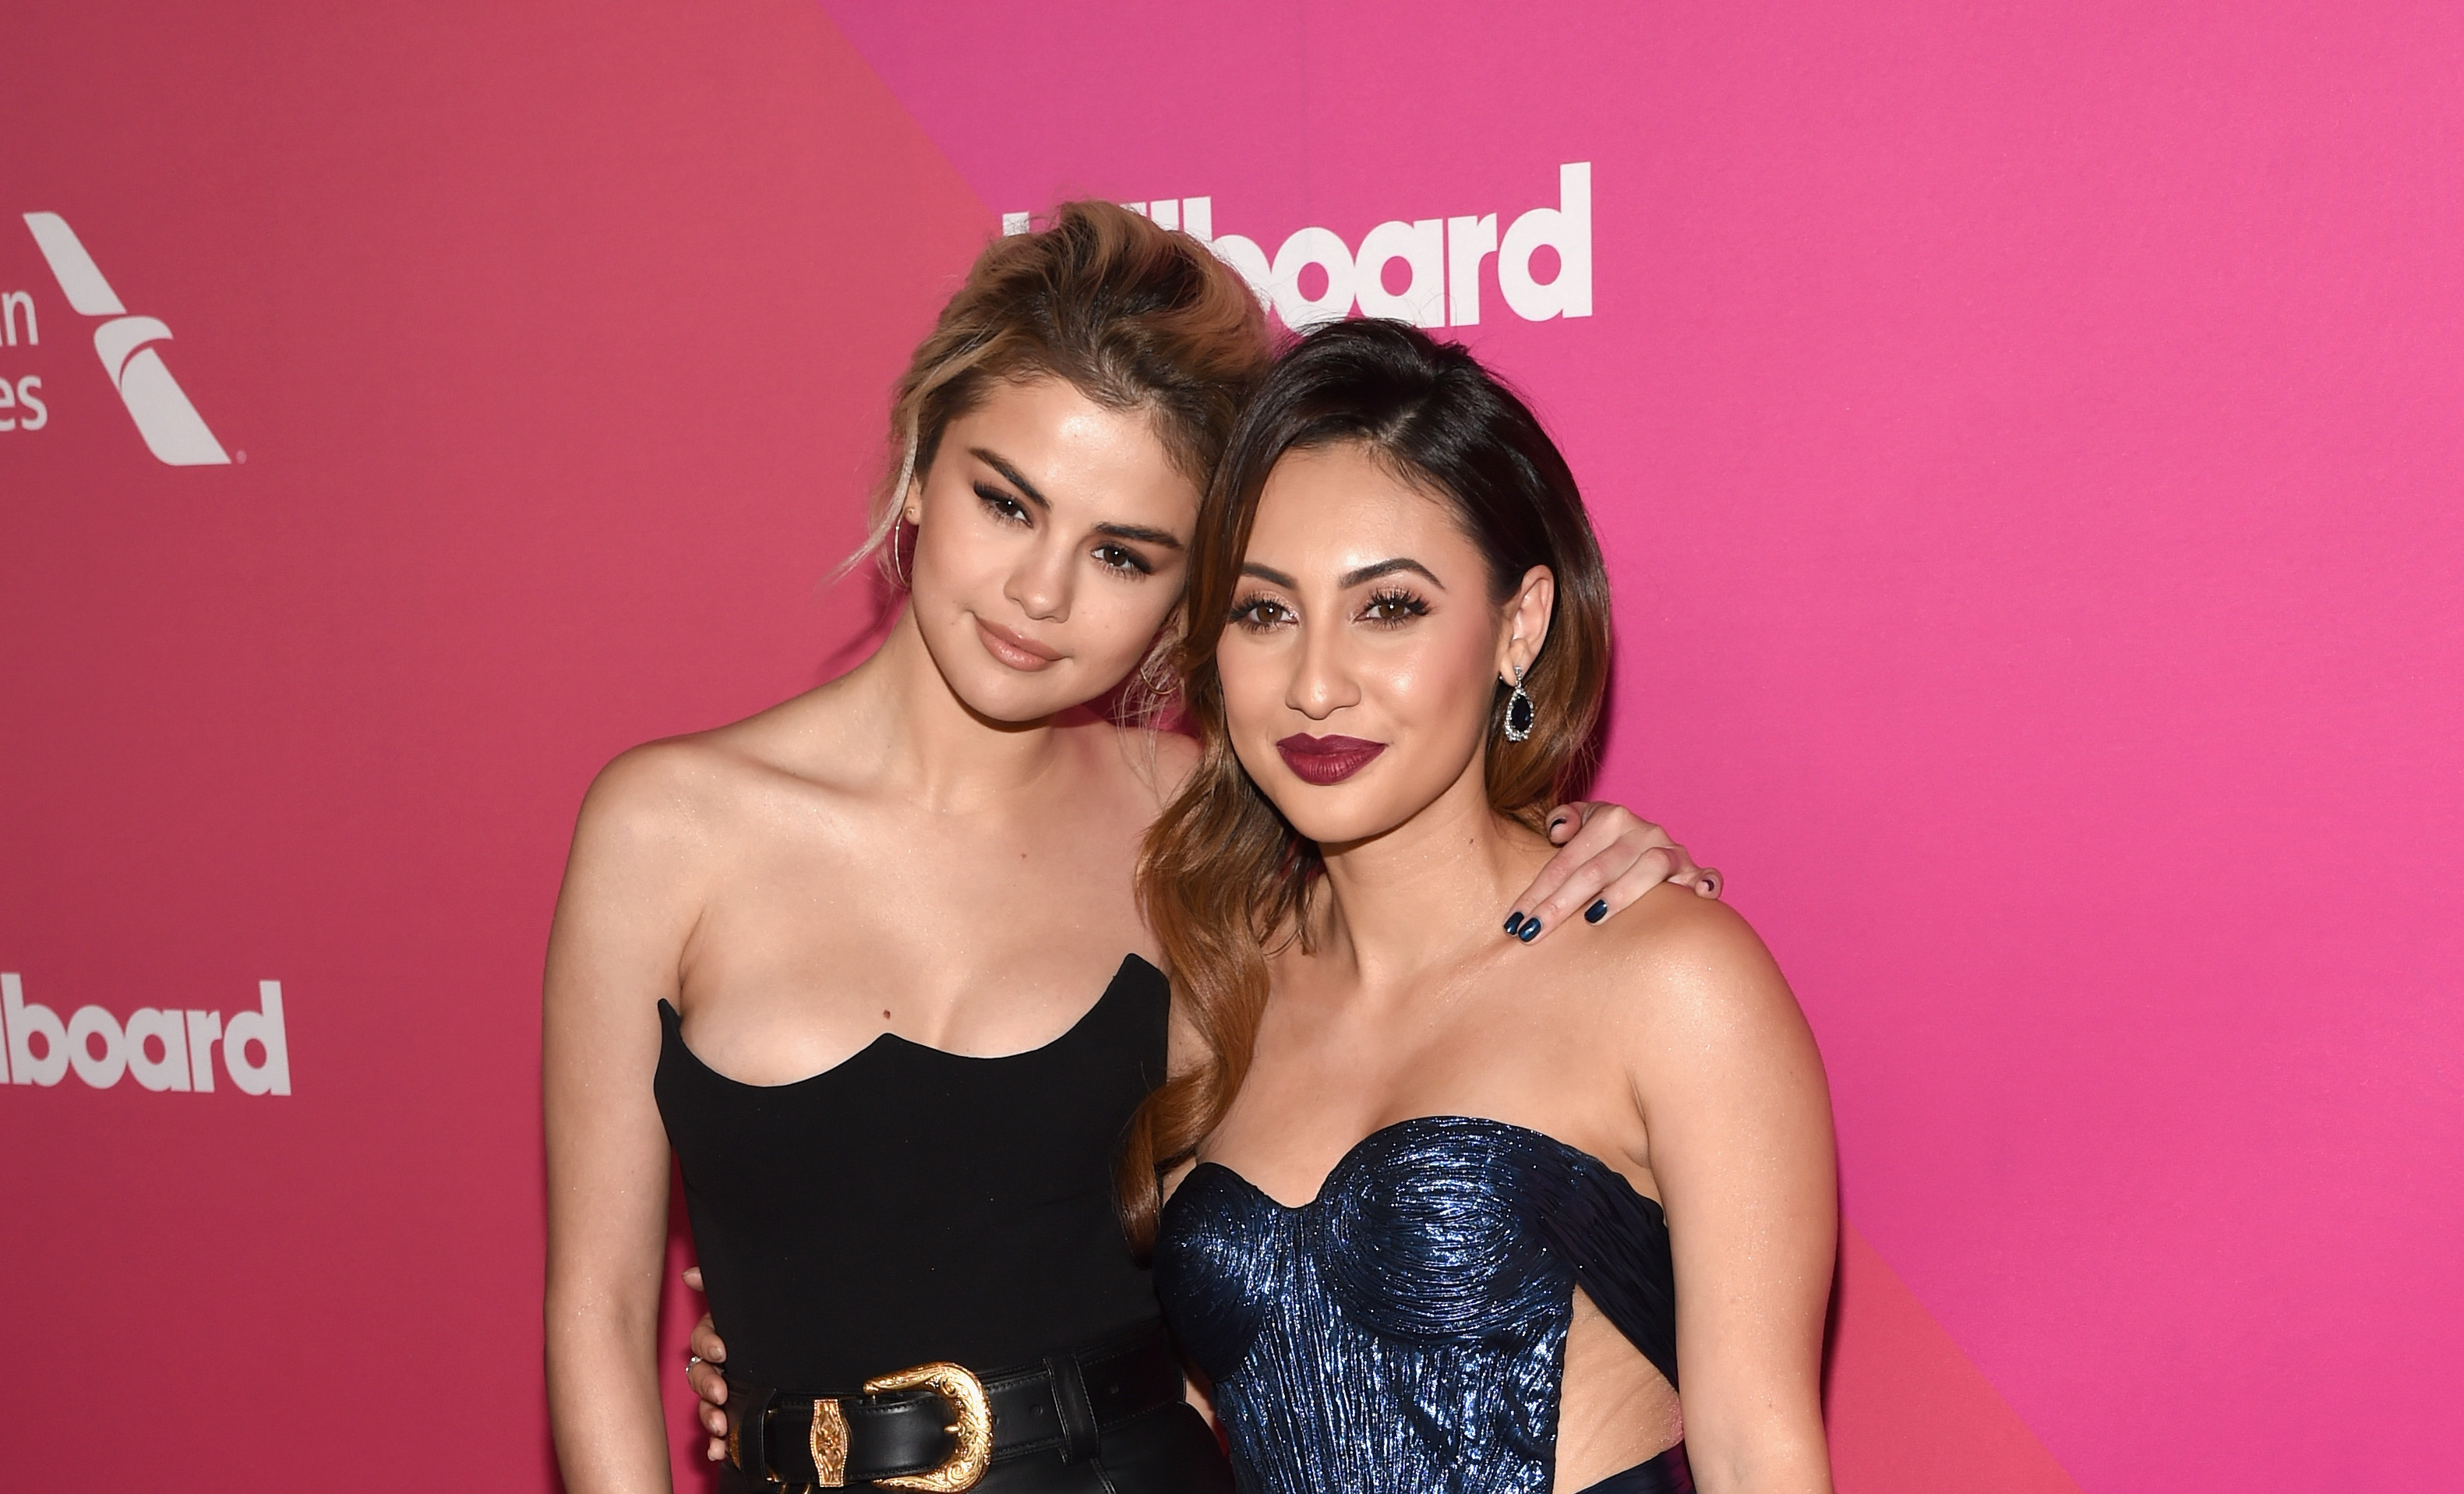 Honoree Selena Gomez and Francia Raisa attend Billboard Women In Music 2017 at The Ray Dolby Ballroom at Hollywood & Highland Center on November 30, 2017 in Hollywood, California. Photo by Michael Kovac/Getty Images for Billboard